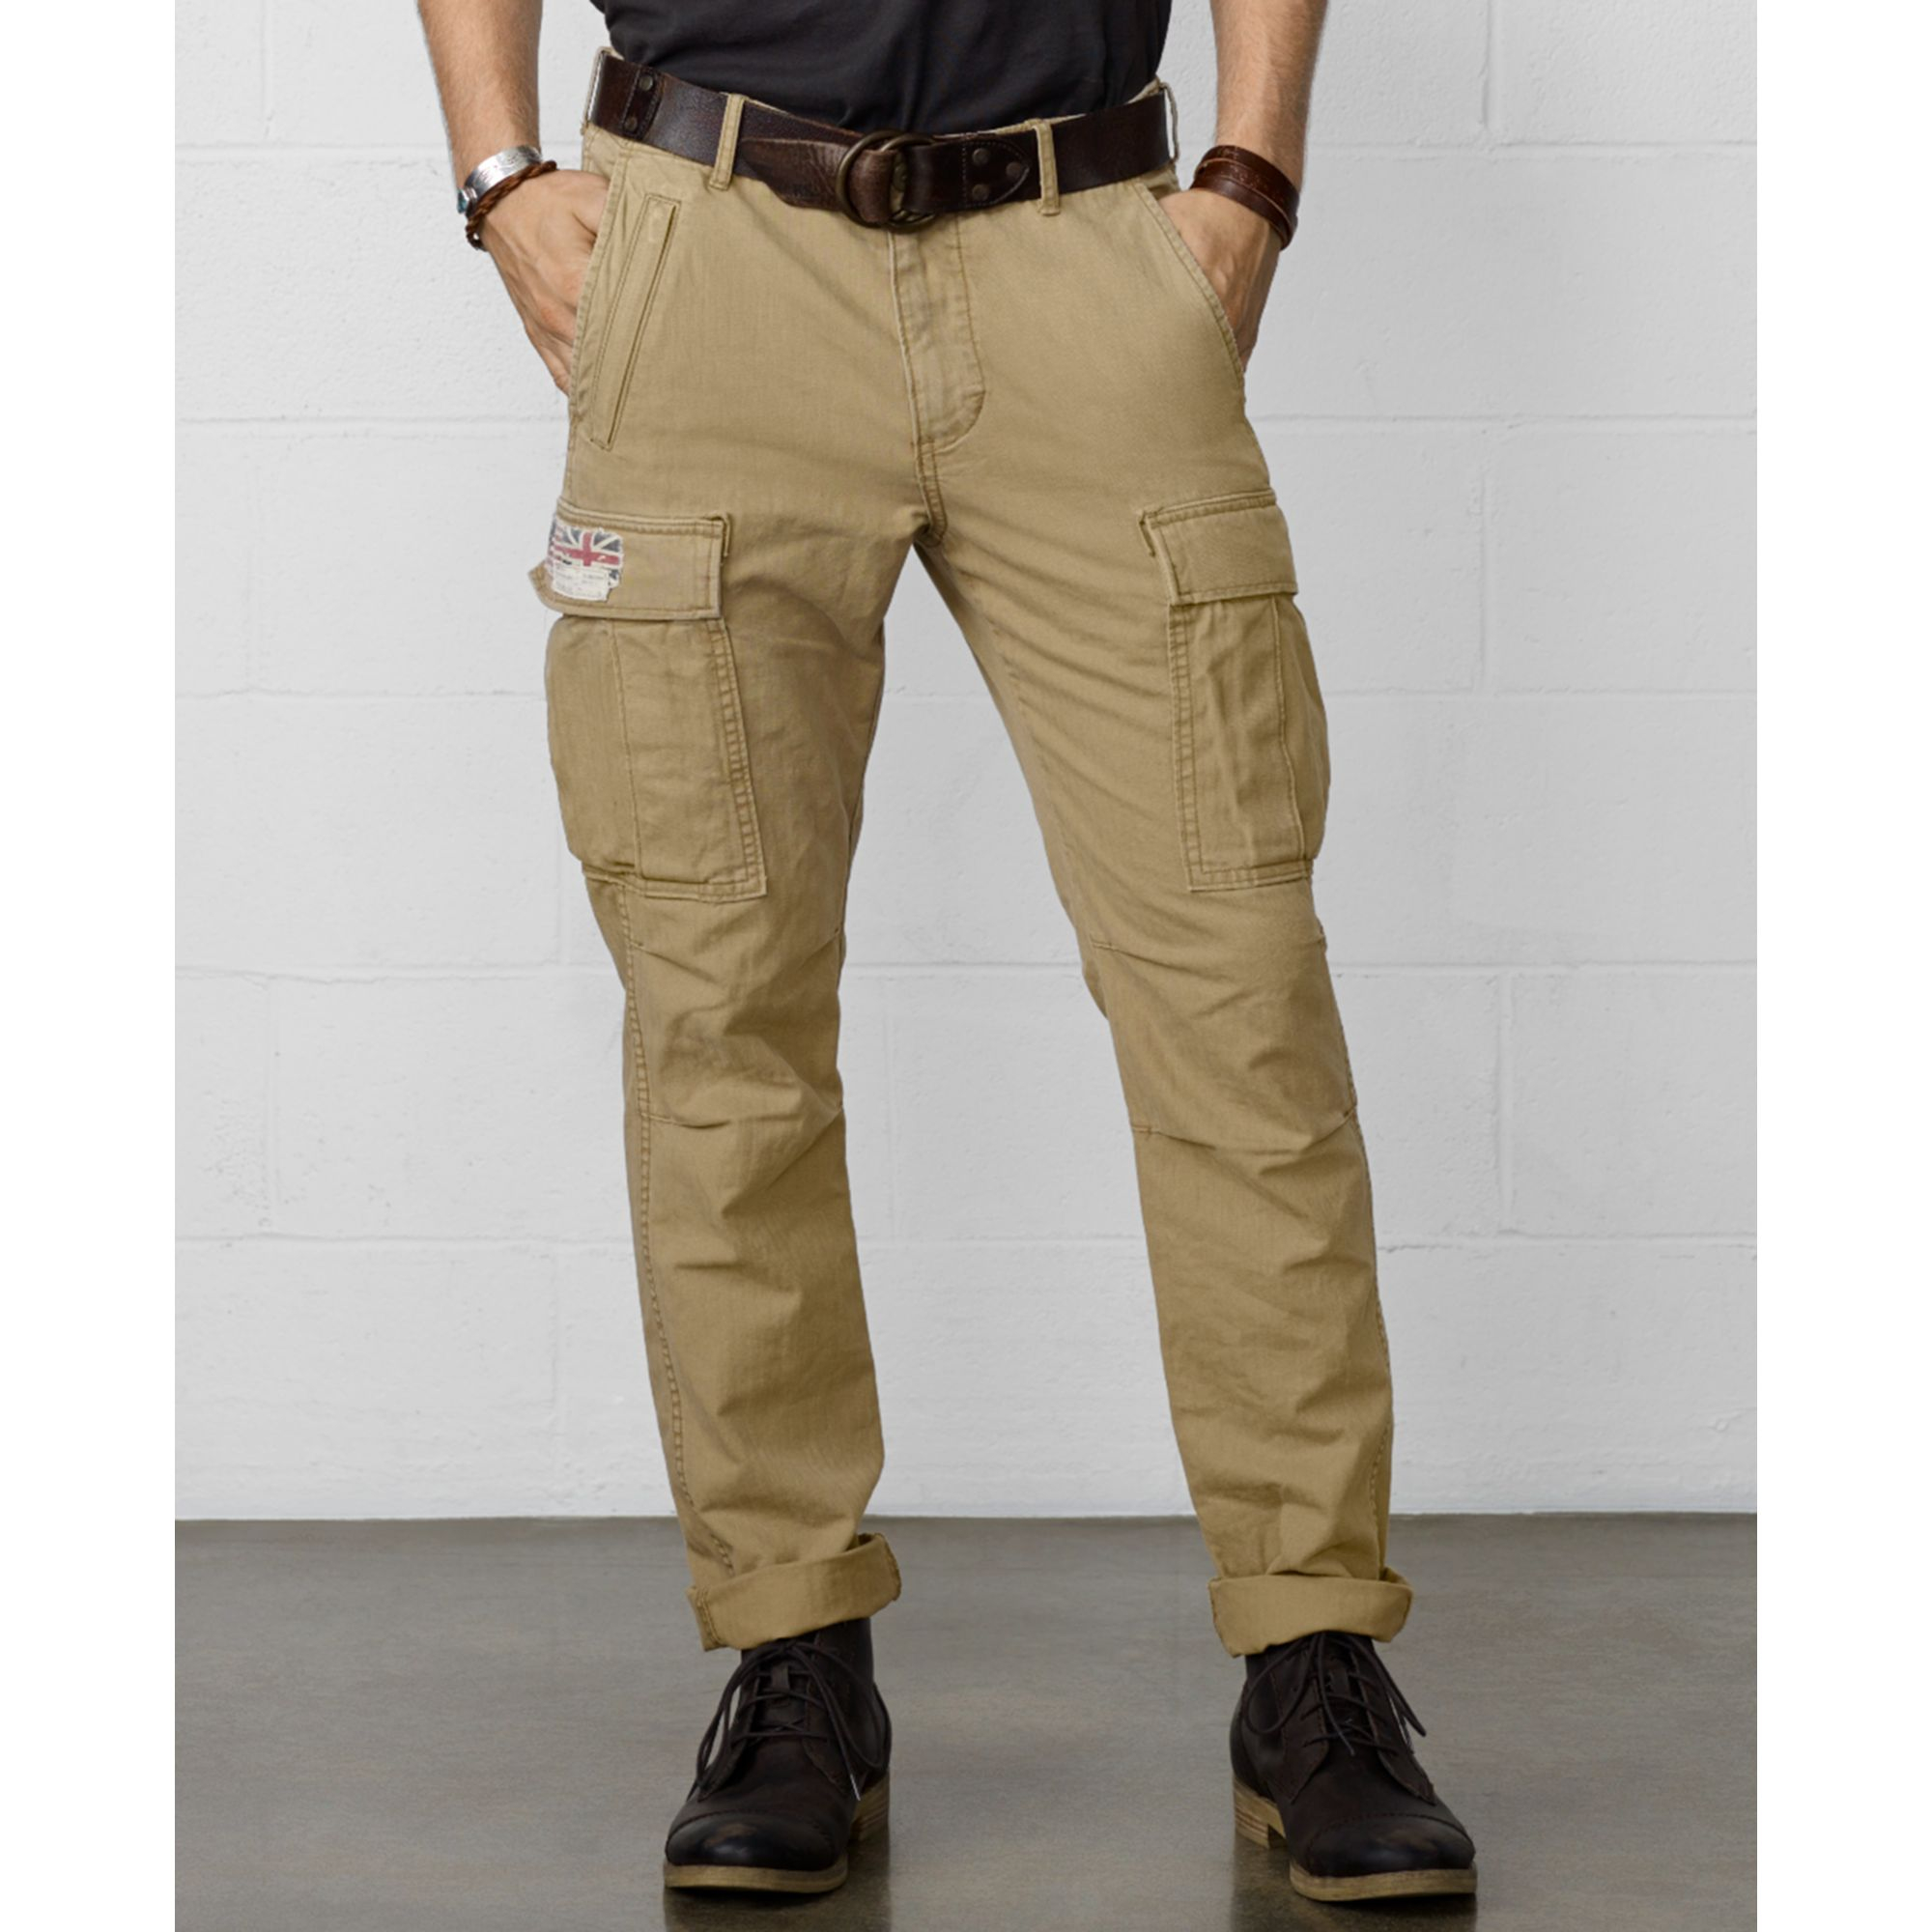 mens travel pants with zipper pockets